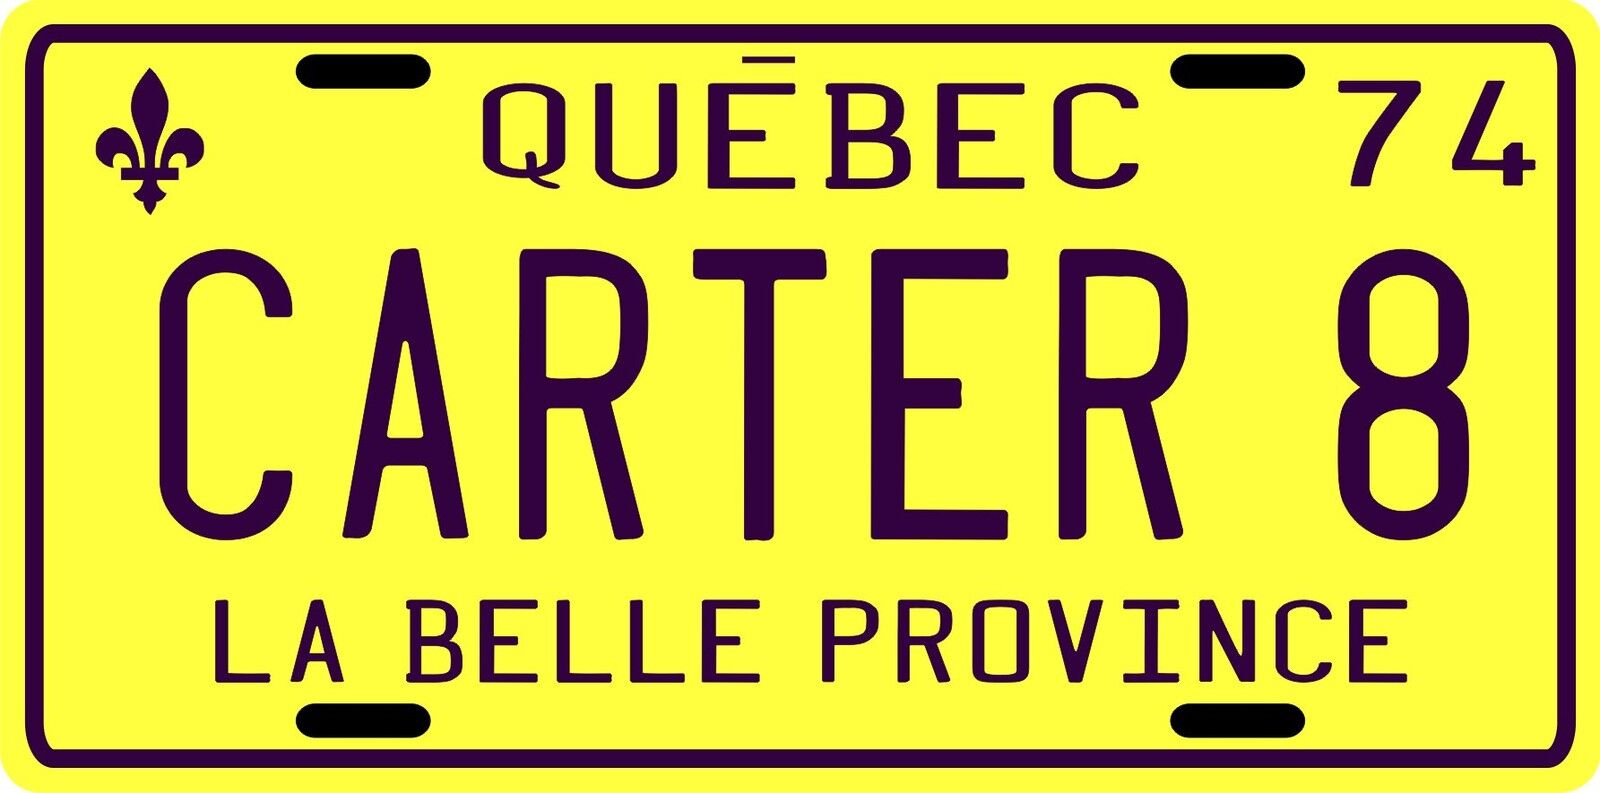 Gary Carter Montreal Expos Rookie 1974 License plate